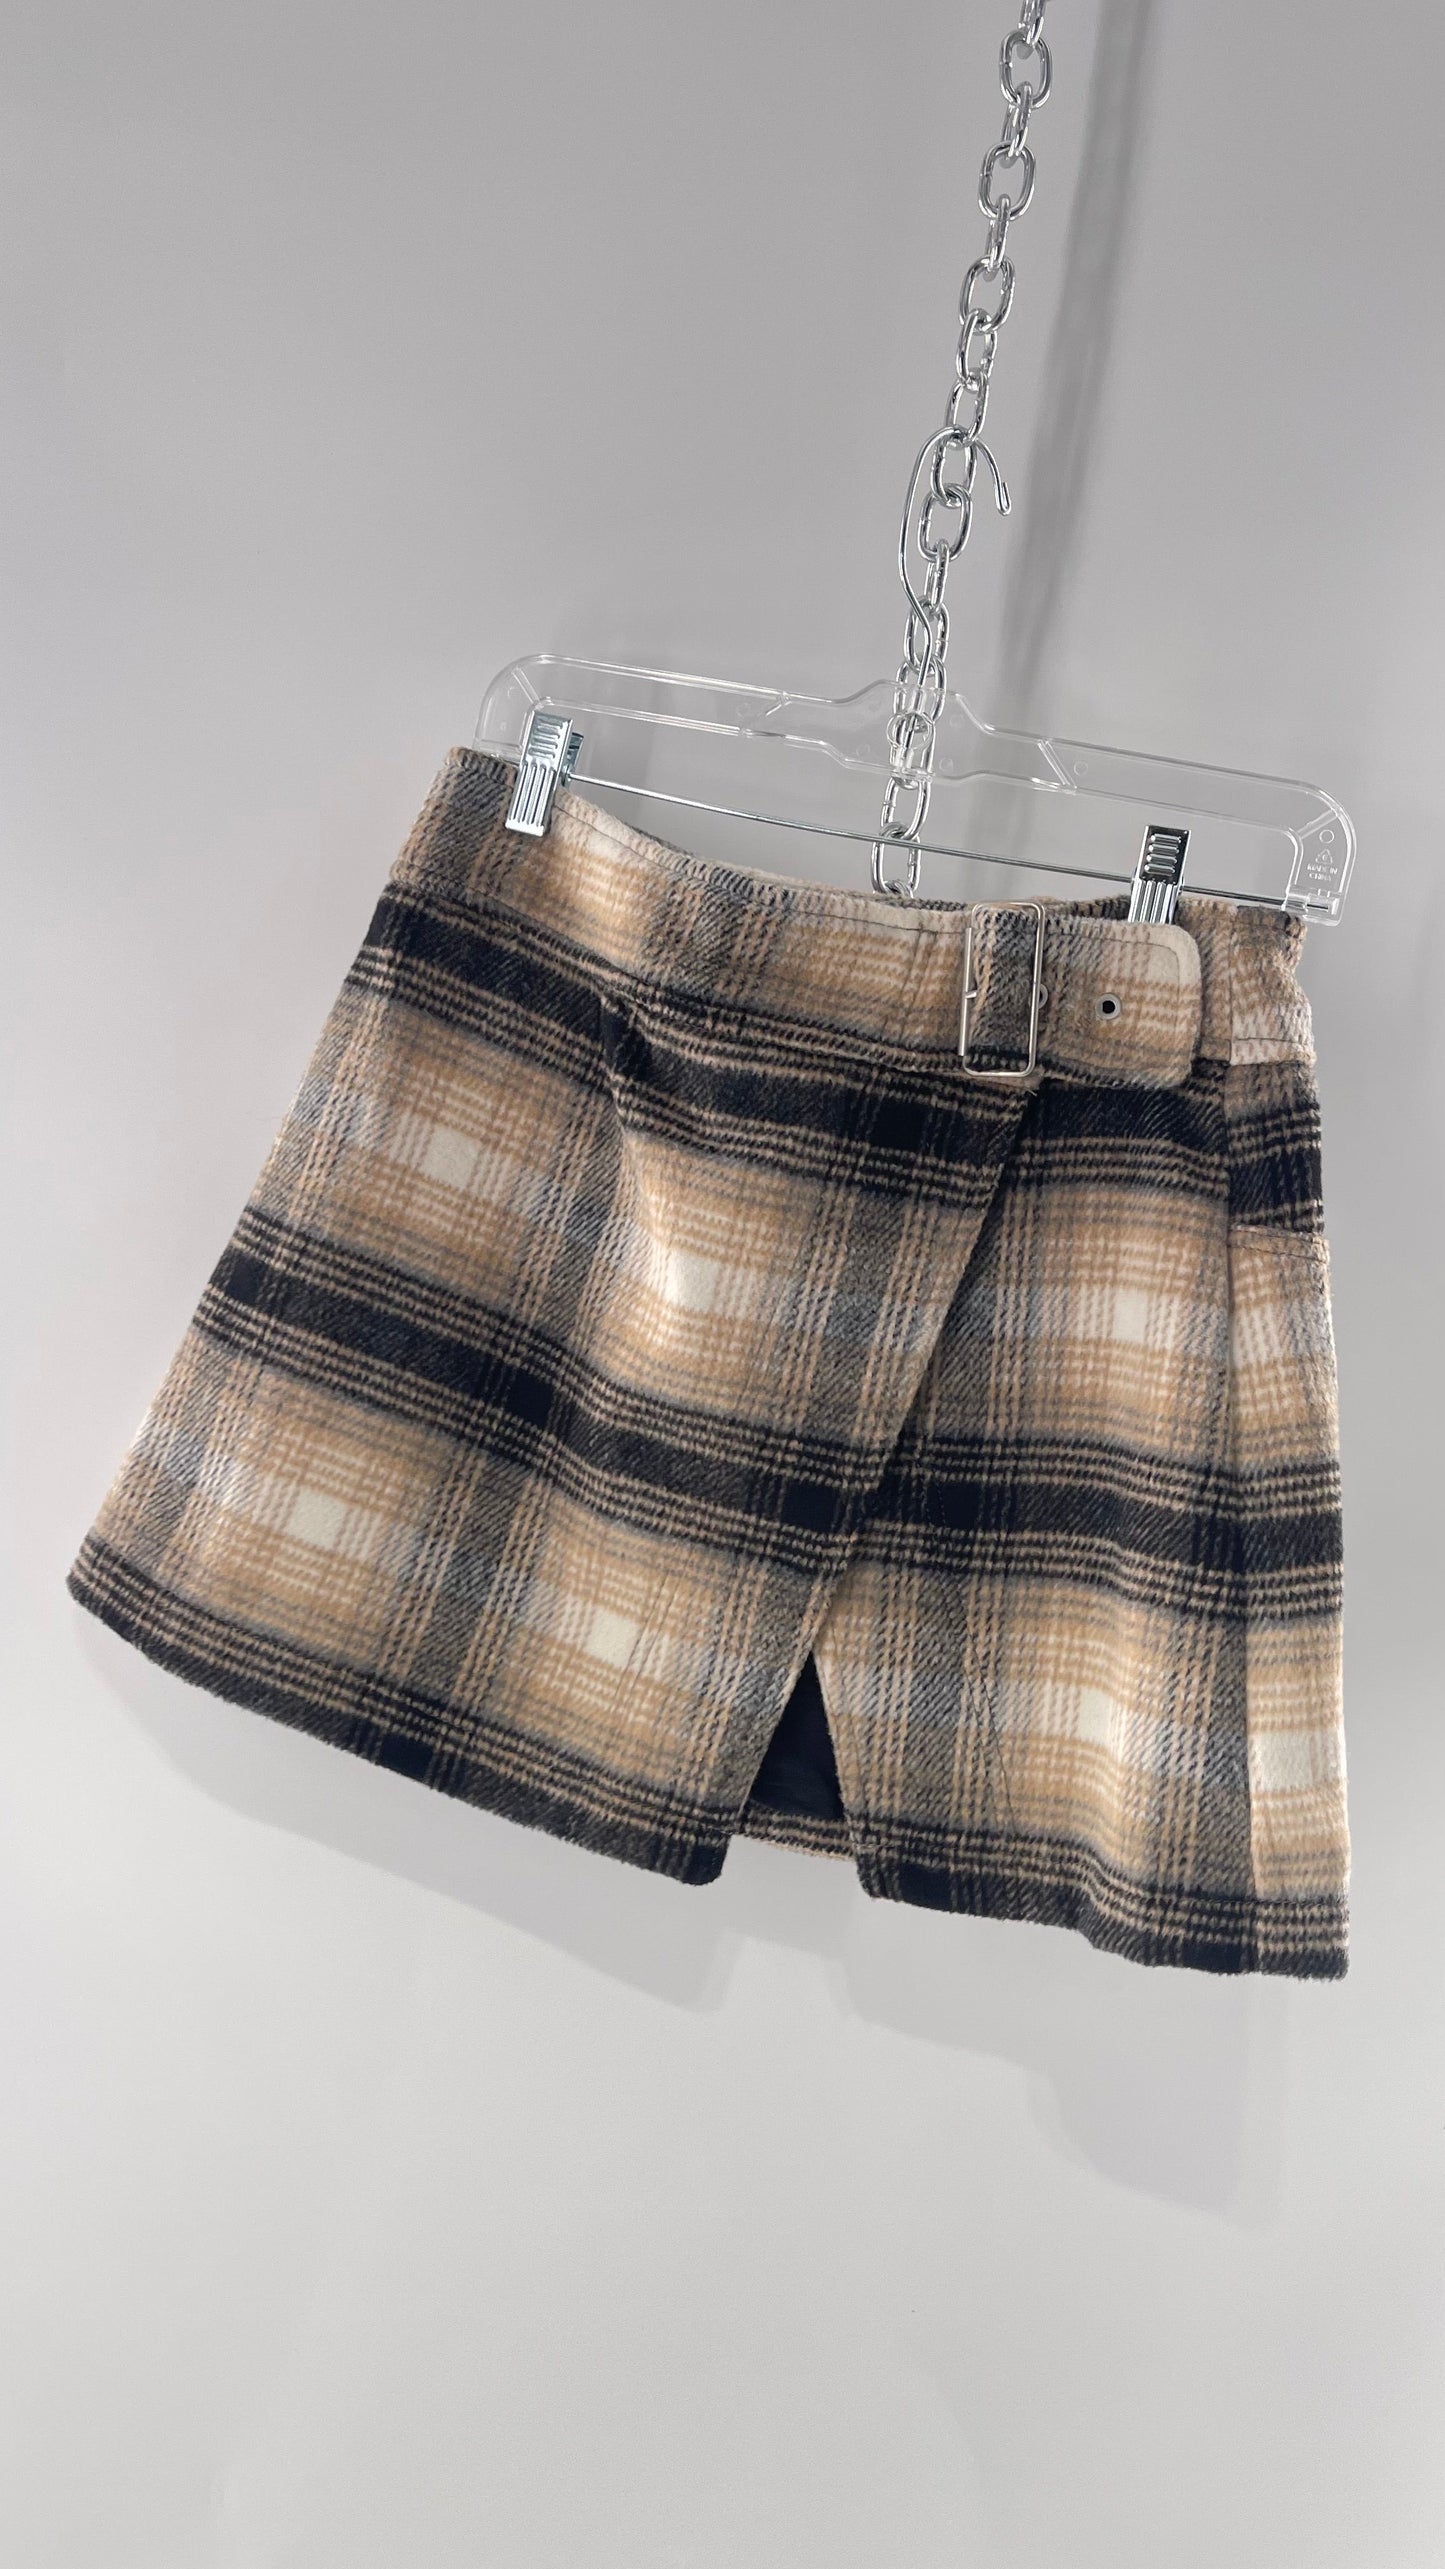 Free People Plaid Beige Gray Soft Mini Skirt with Side Slit and Built in Grommet Belt (10)